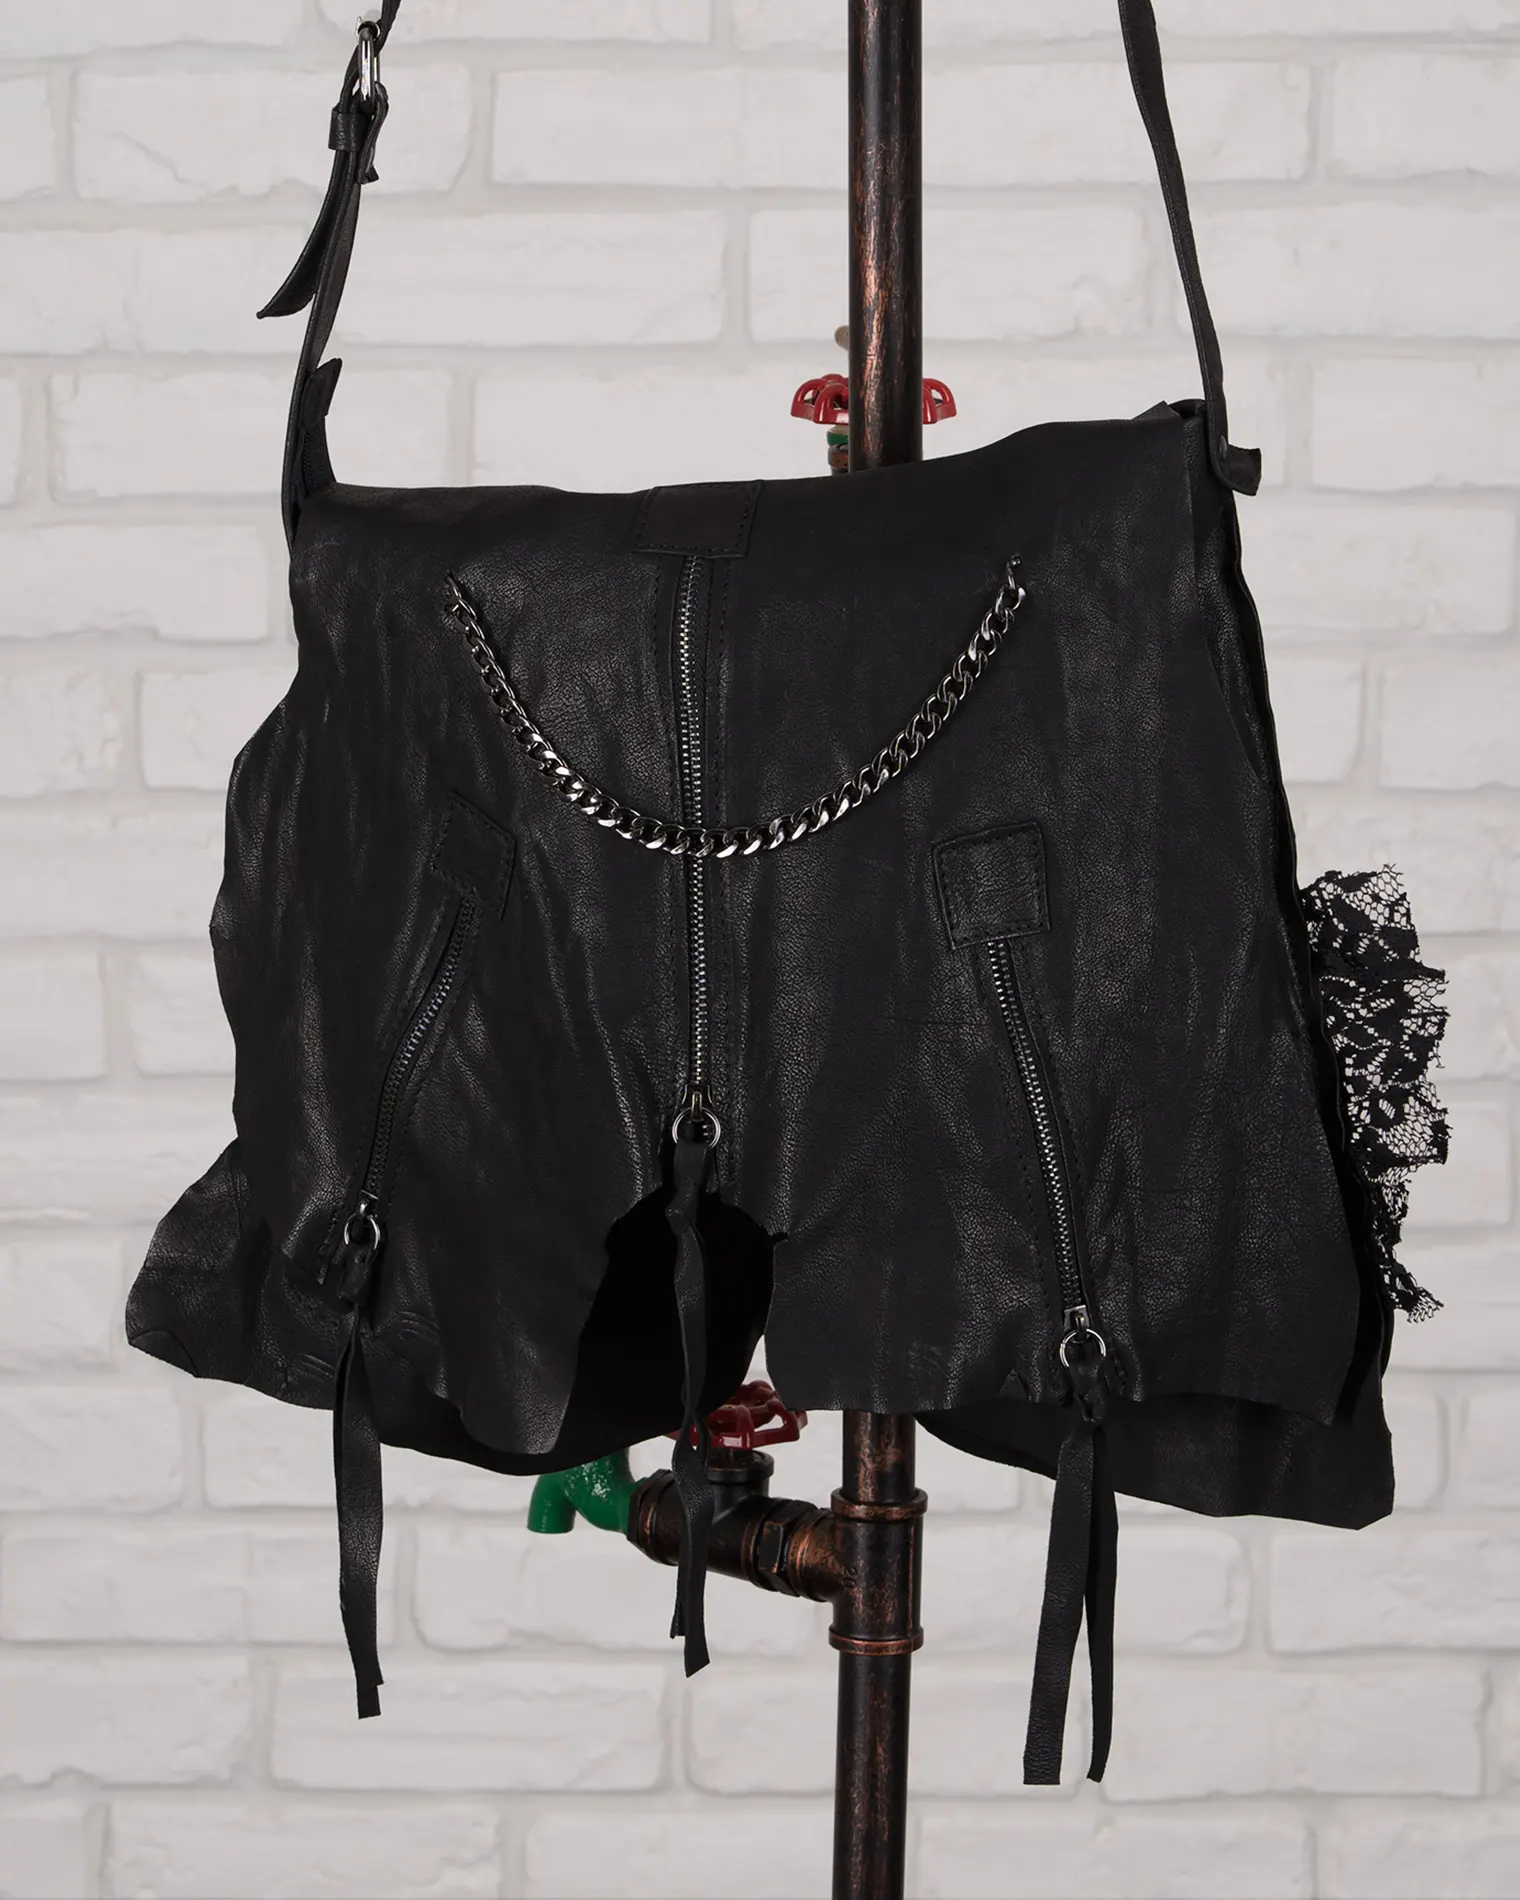 Sensual Leather Bag With Lace, Black Color